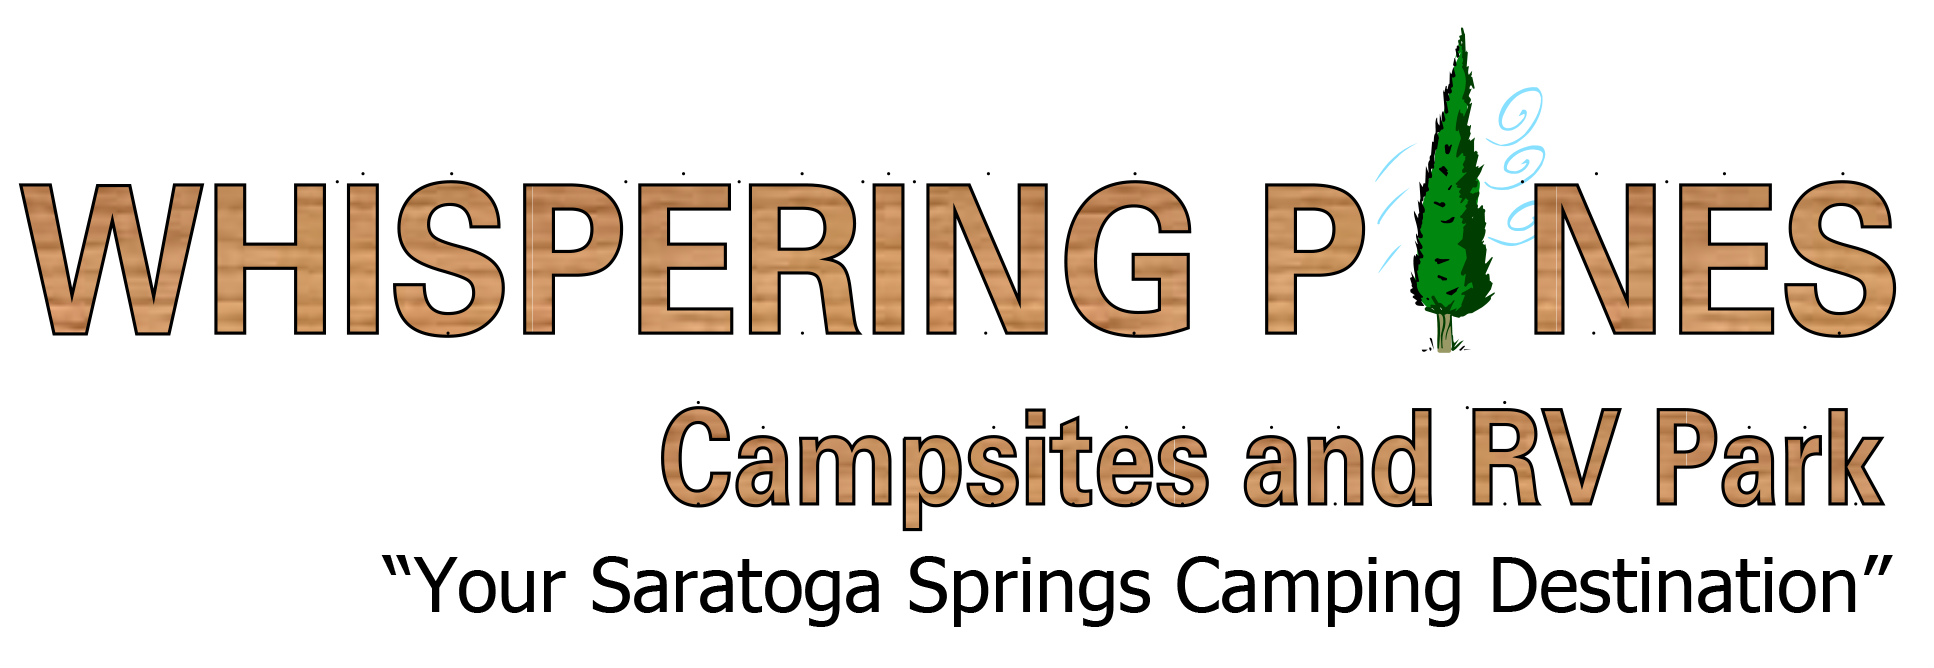 Whispering Pines Campsites and RV Park logo